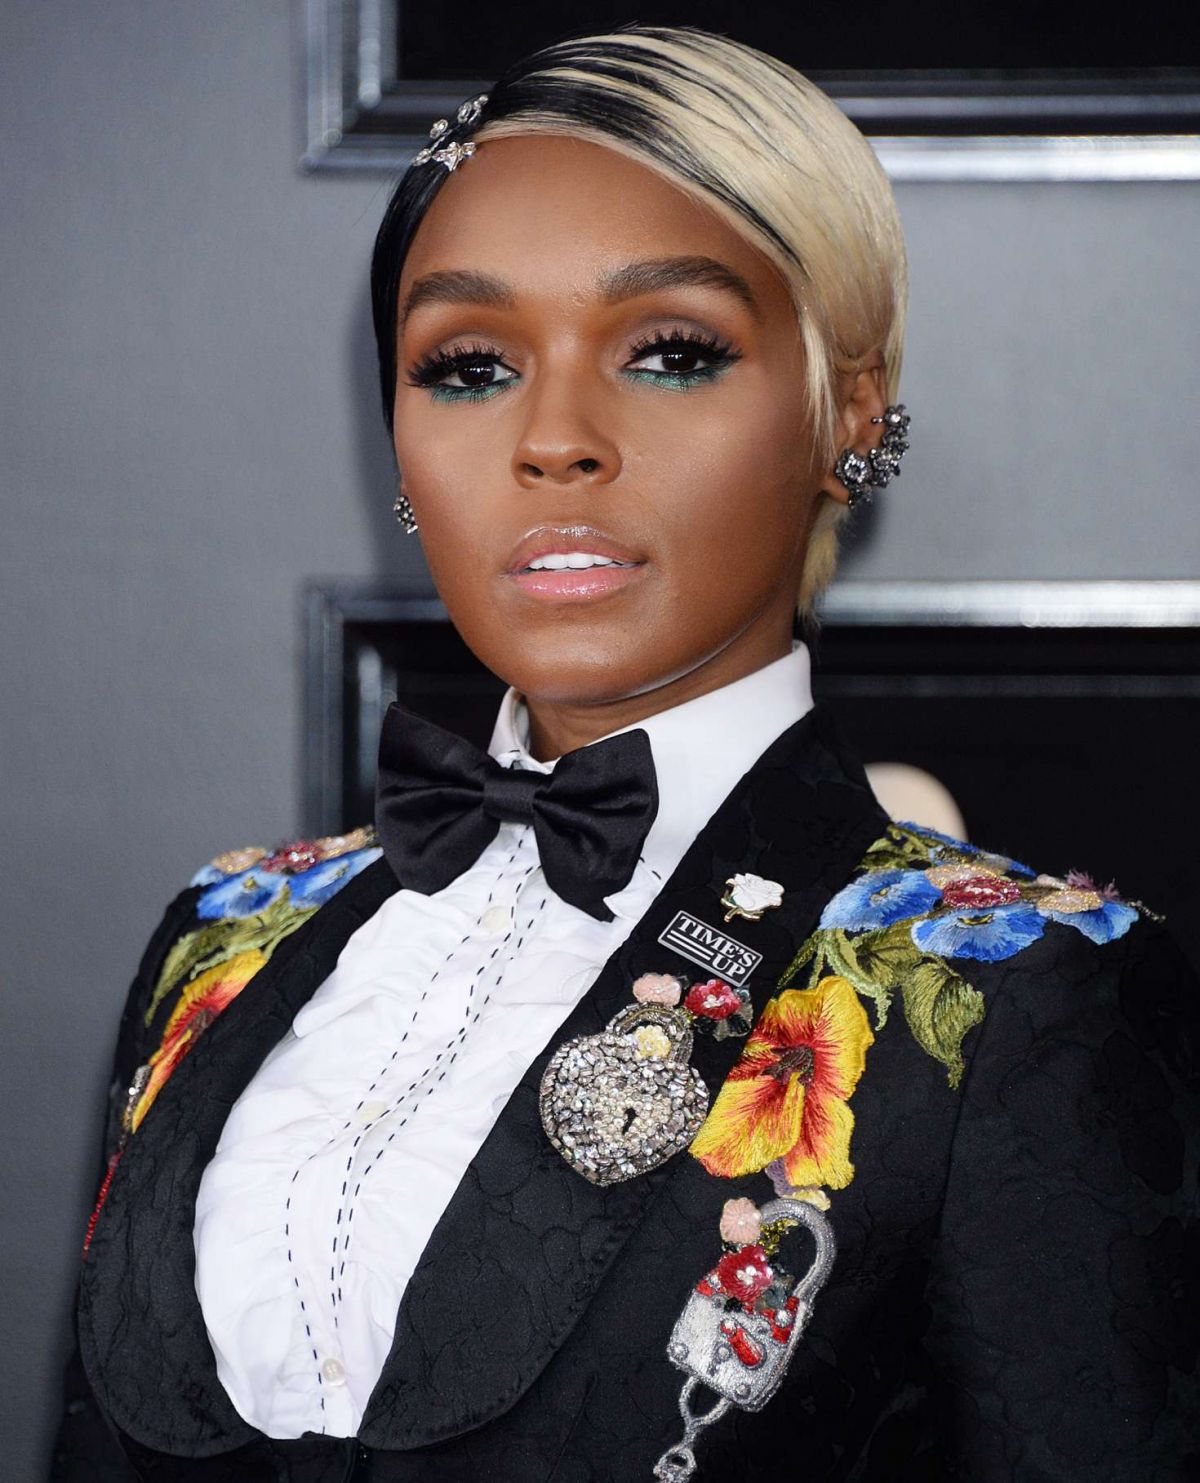 JANELLE MONAE at Grammy 2018 Awards in New York 01/28/2018 – HawtCelebs